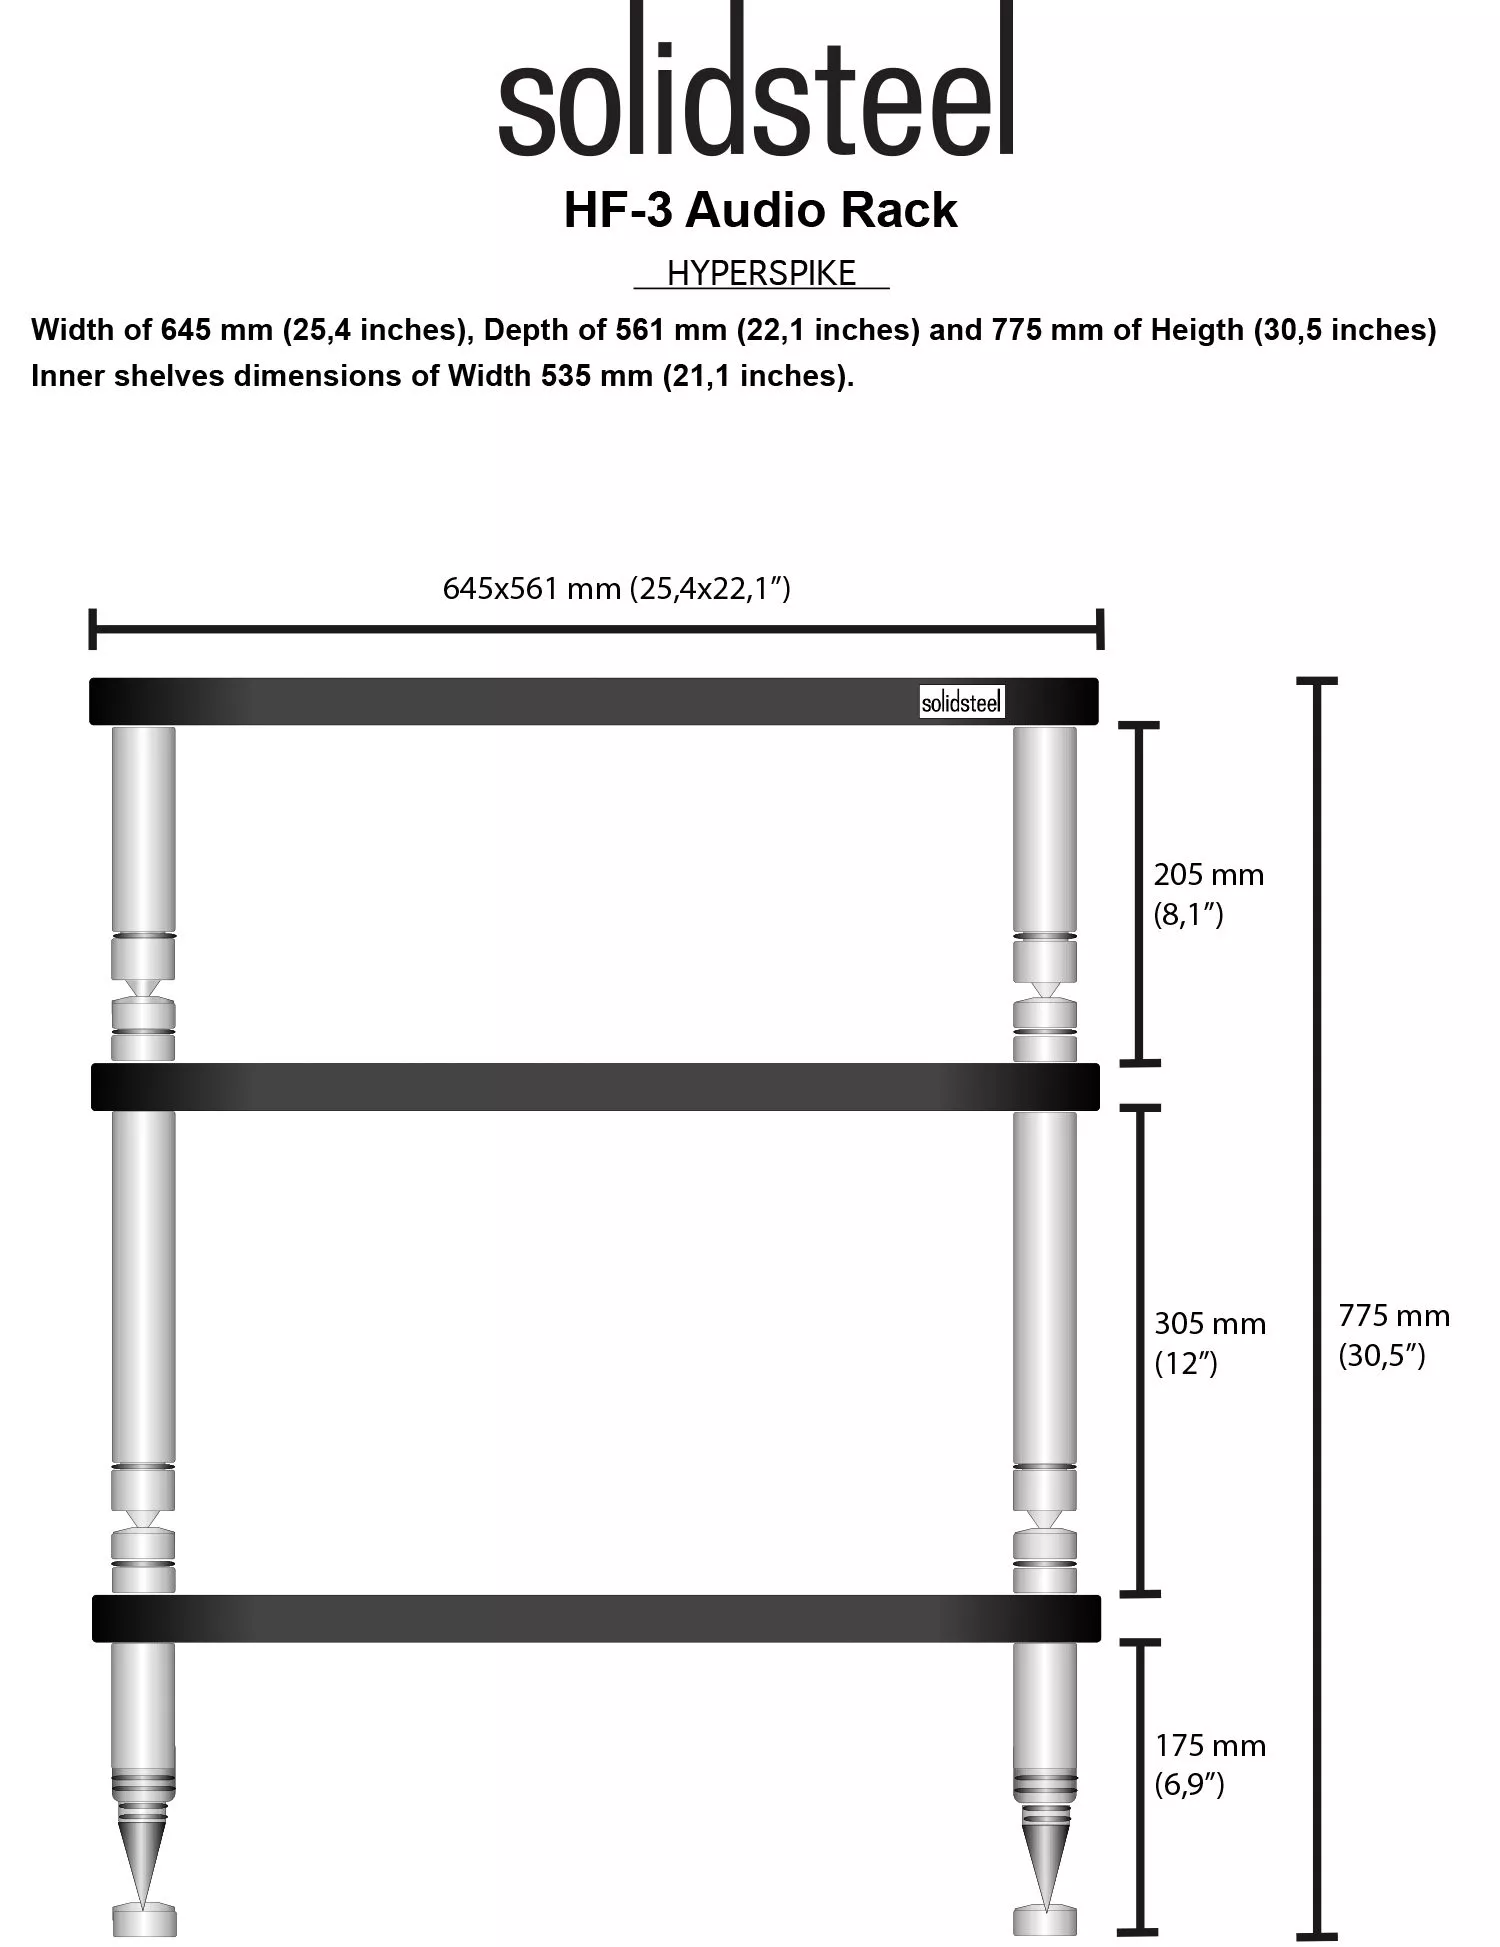 Solidsteel HF-3 dimension taille rack